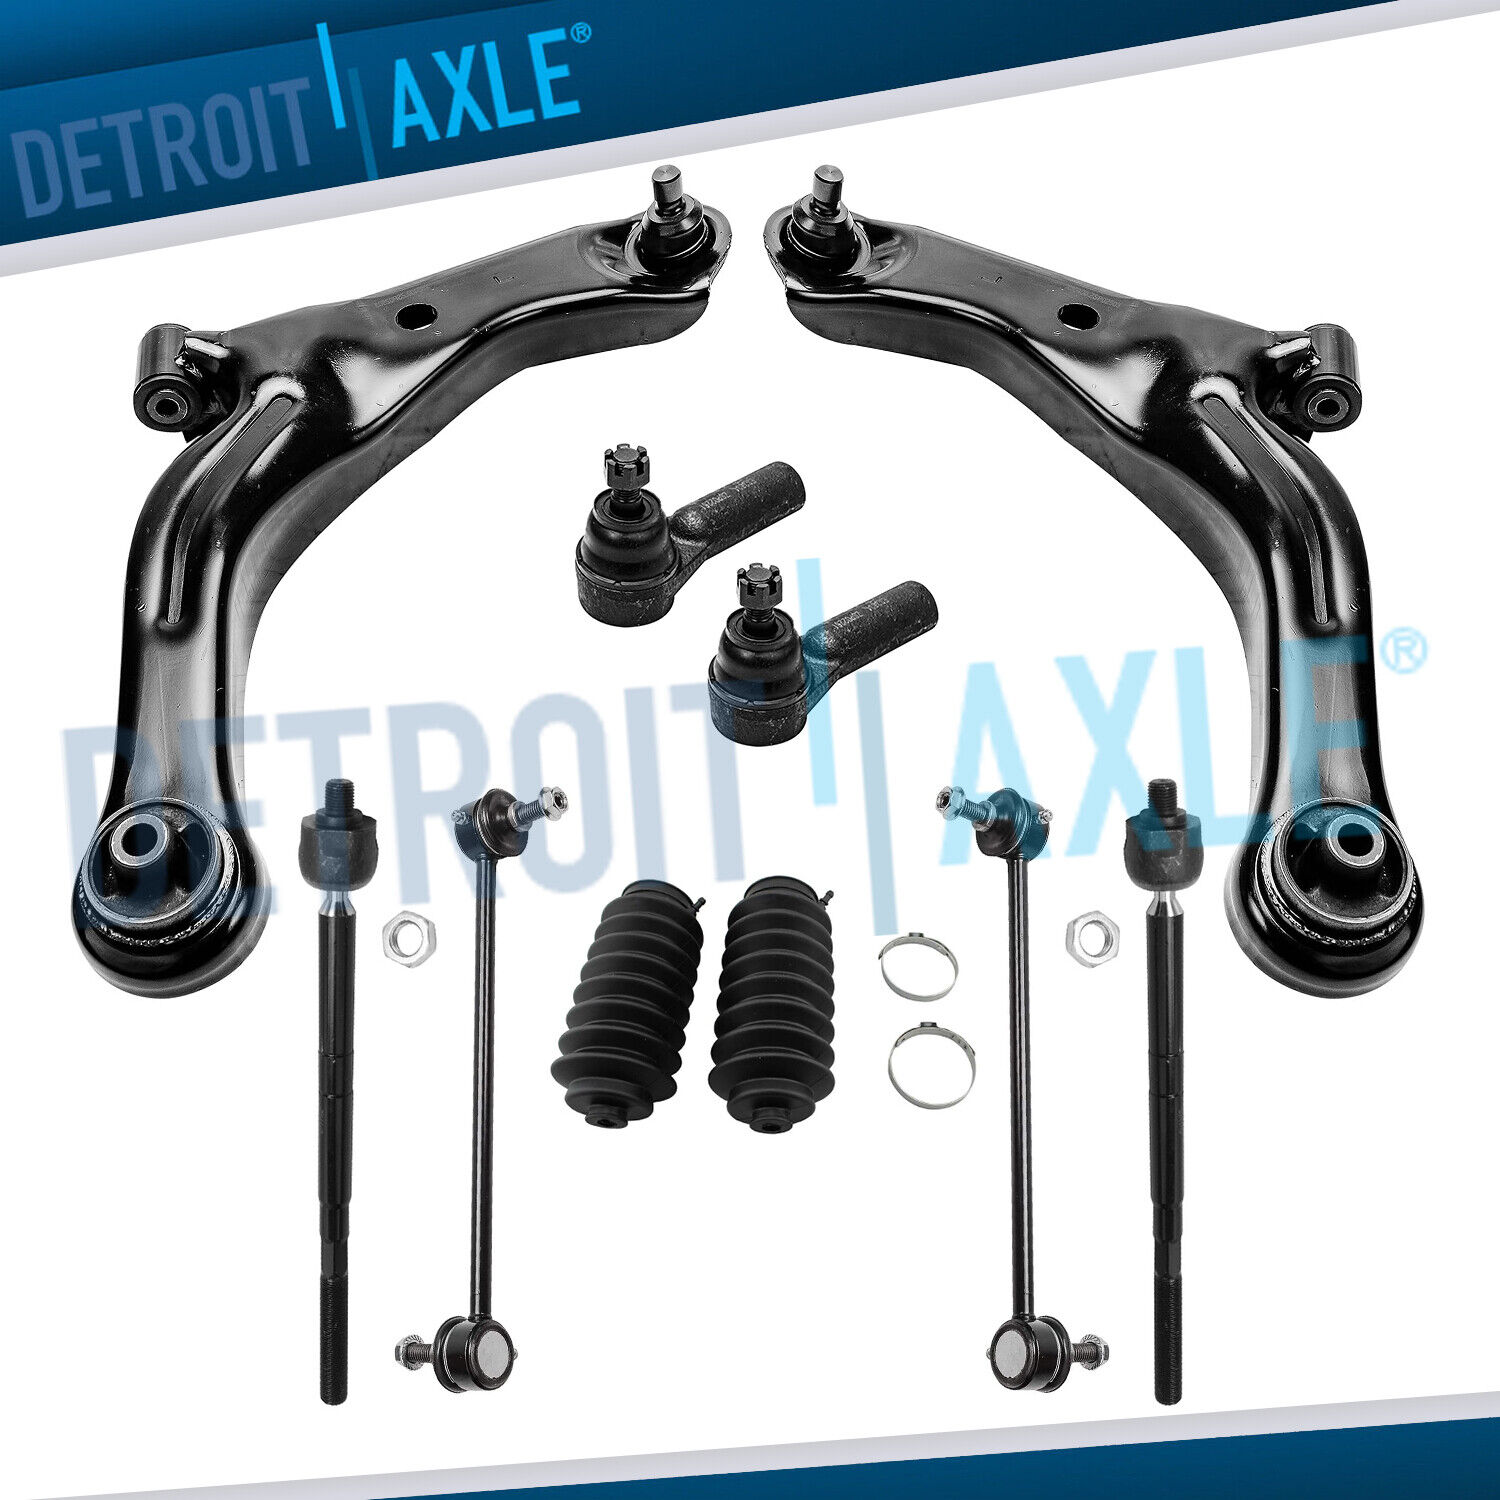 10pc Front Lower Control Arm + Sway Bar + Tie Rod for 2005-2009 Mazda Tribute